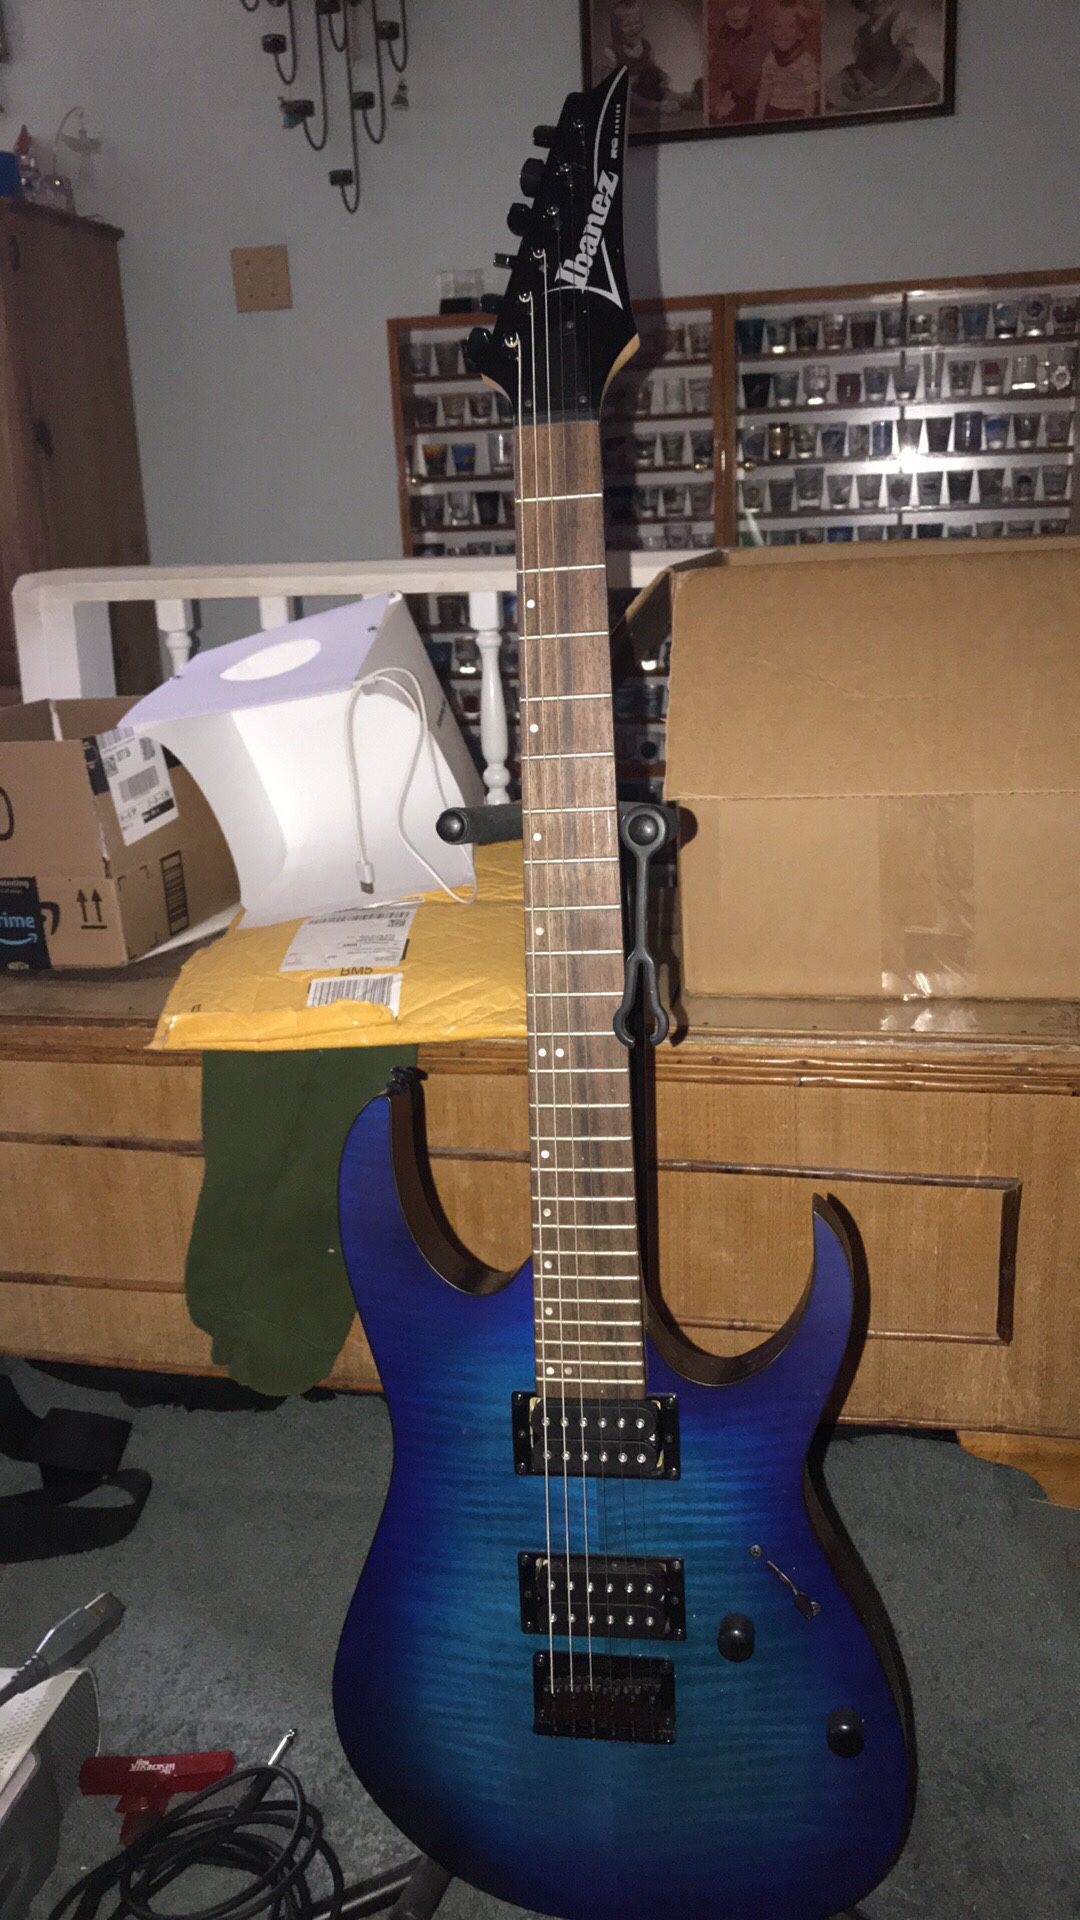 Ibanez RG6003 Electric Guitar for trade